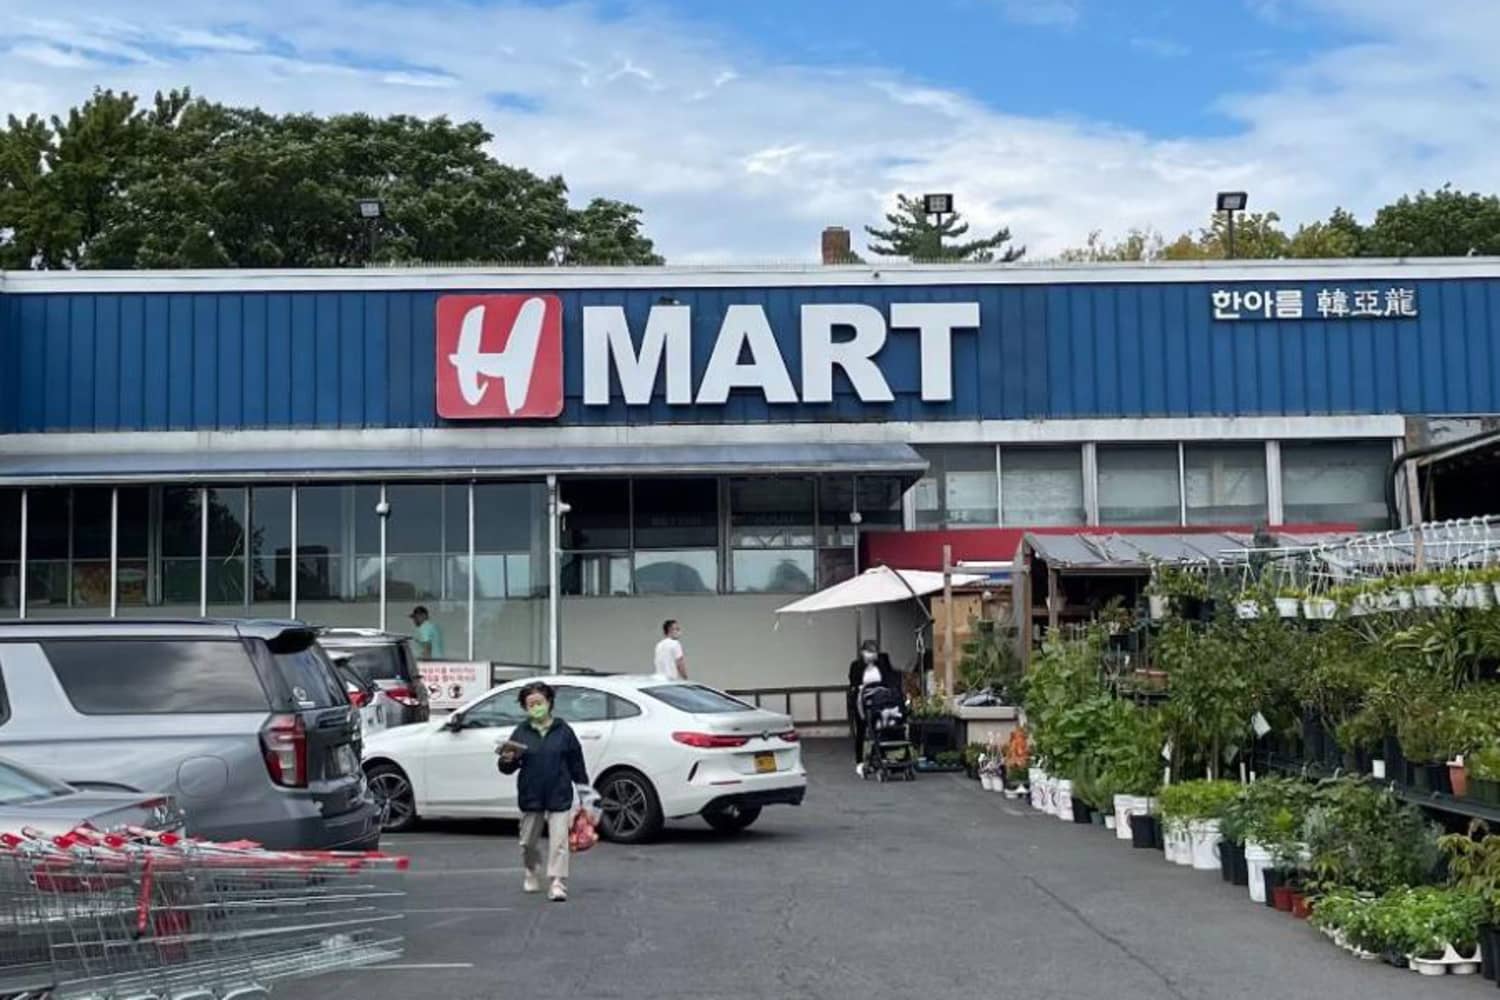 The Best Freezer Finds to Buy at H Mart This Fall